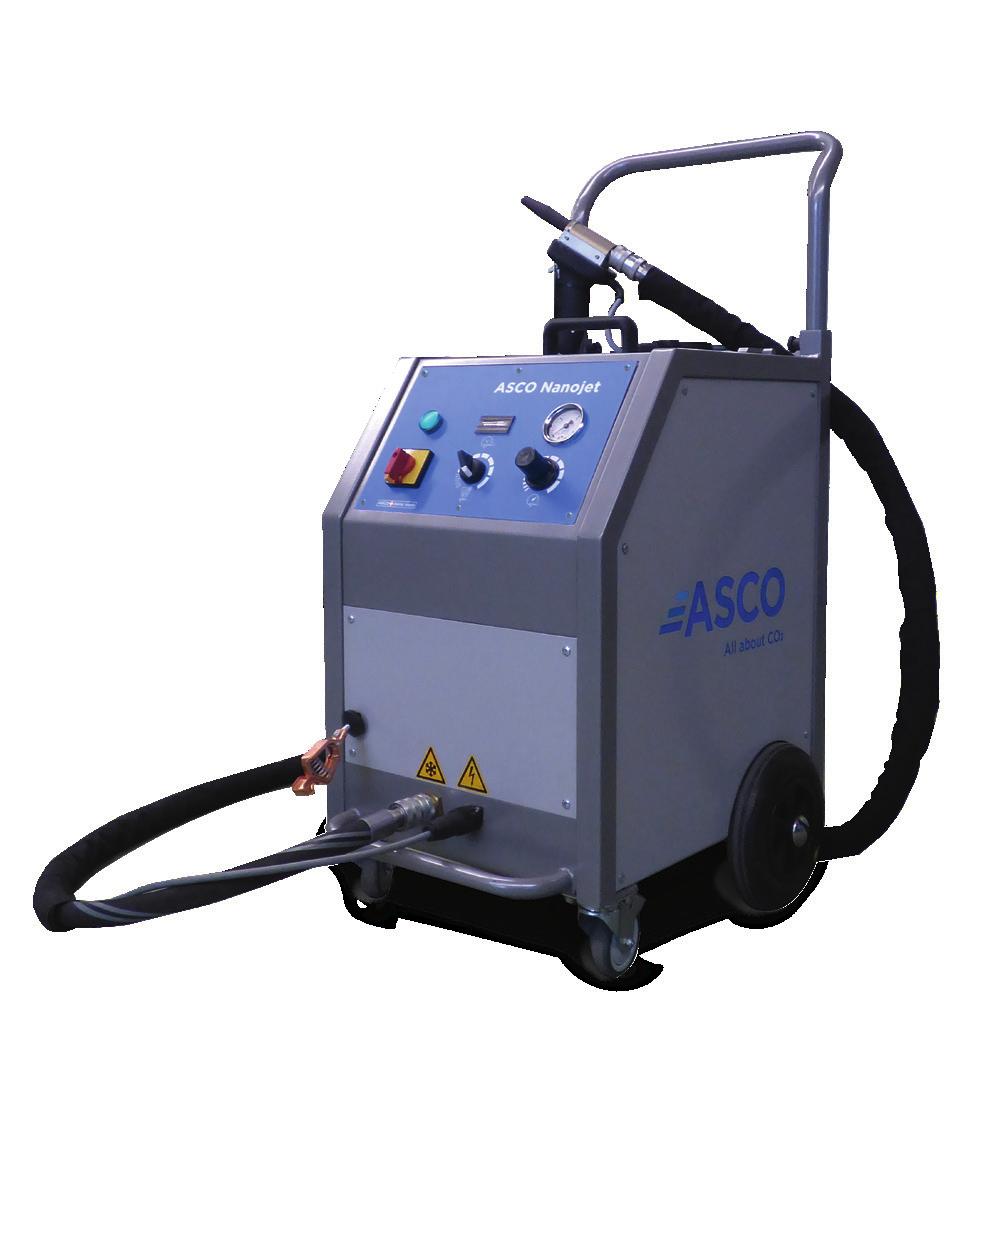 With the ASCO Nanojet a lot of smallest pellets hit on the surface to be cleaned which ensures a precise, fast and consistent surface cleaning.